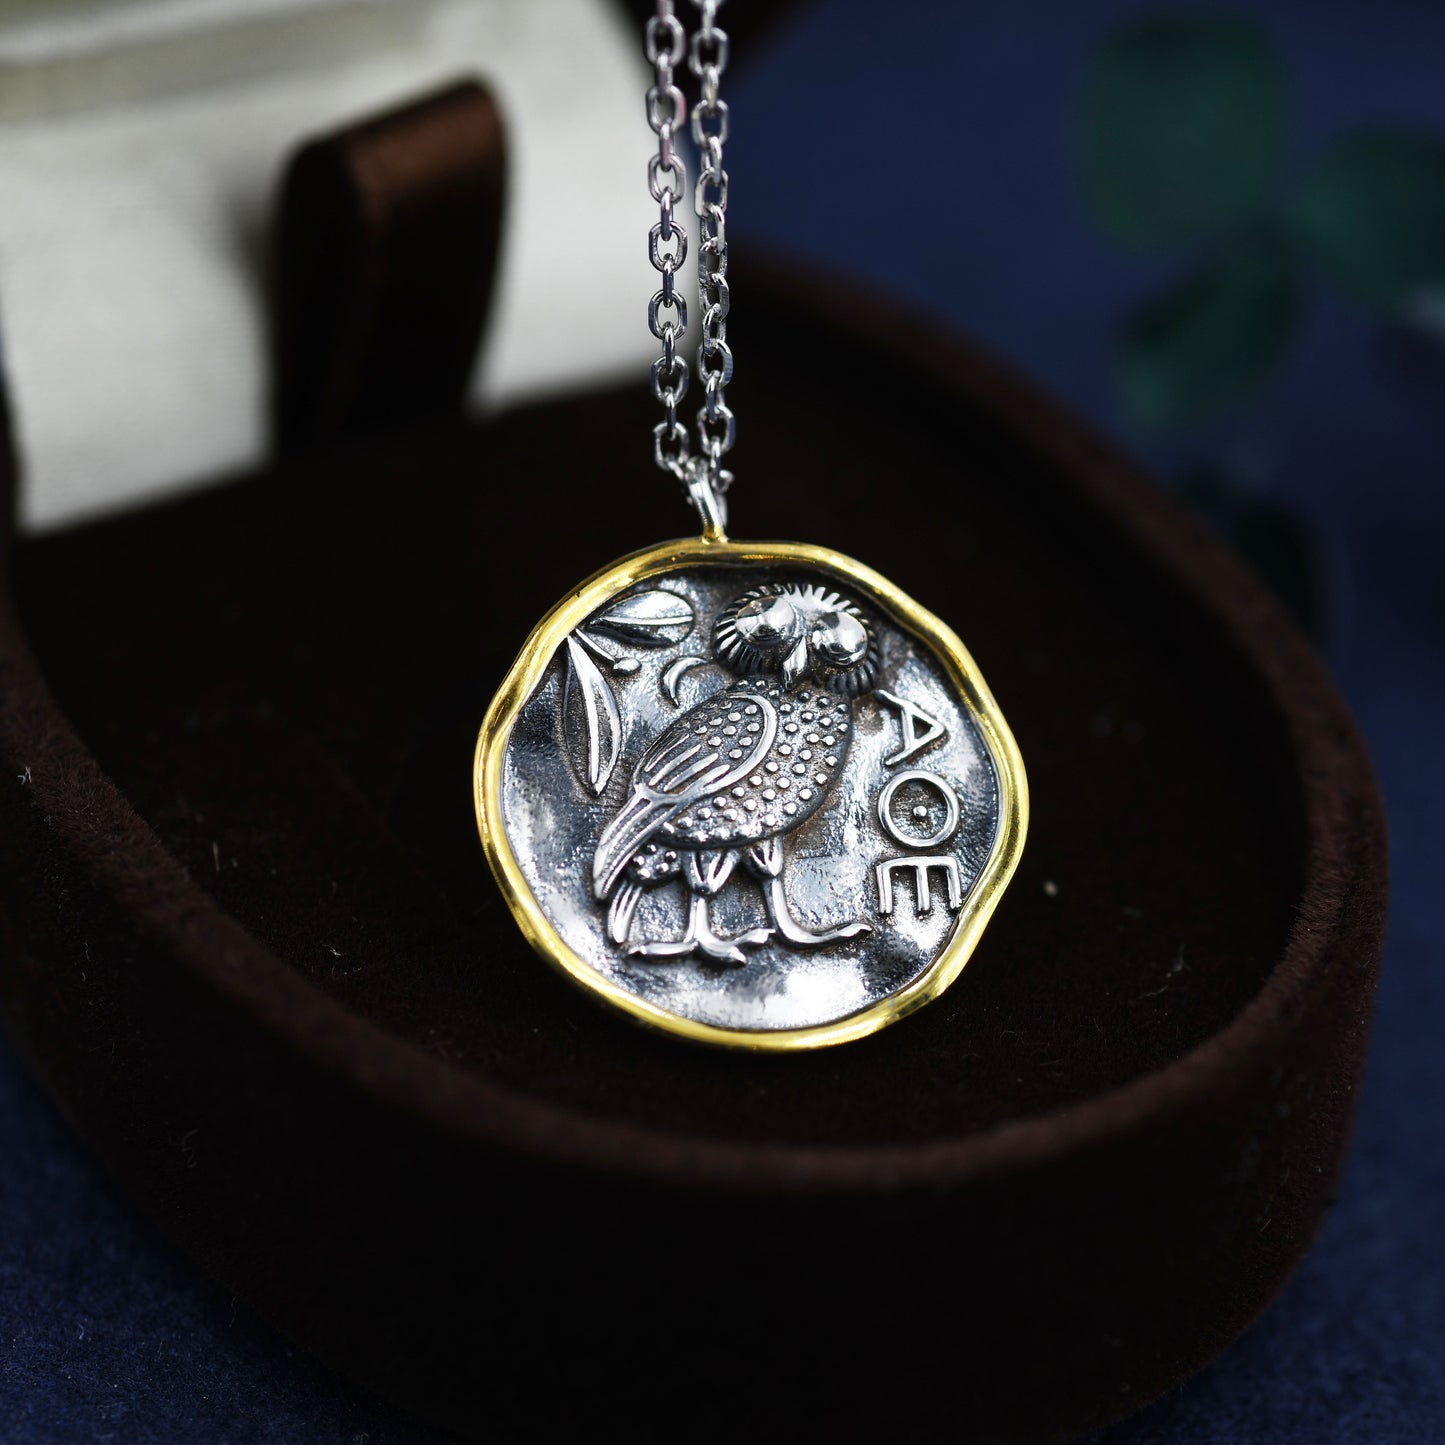 Sterling Silver Greek Coin Pendant Necklace - Owl Coin Necklace , Owl of Athena Coin Necklace in Antique Silver, Ancient Greek Coin Inspired